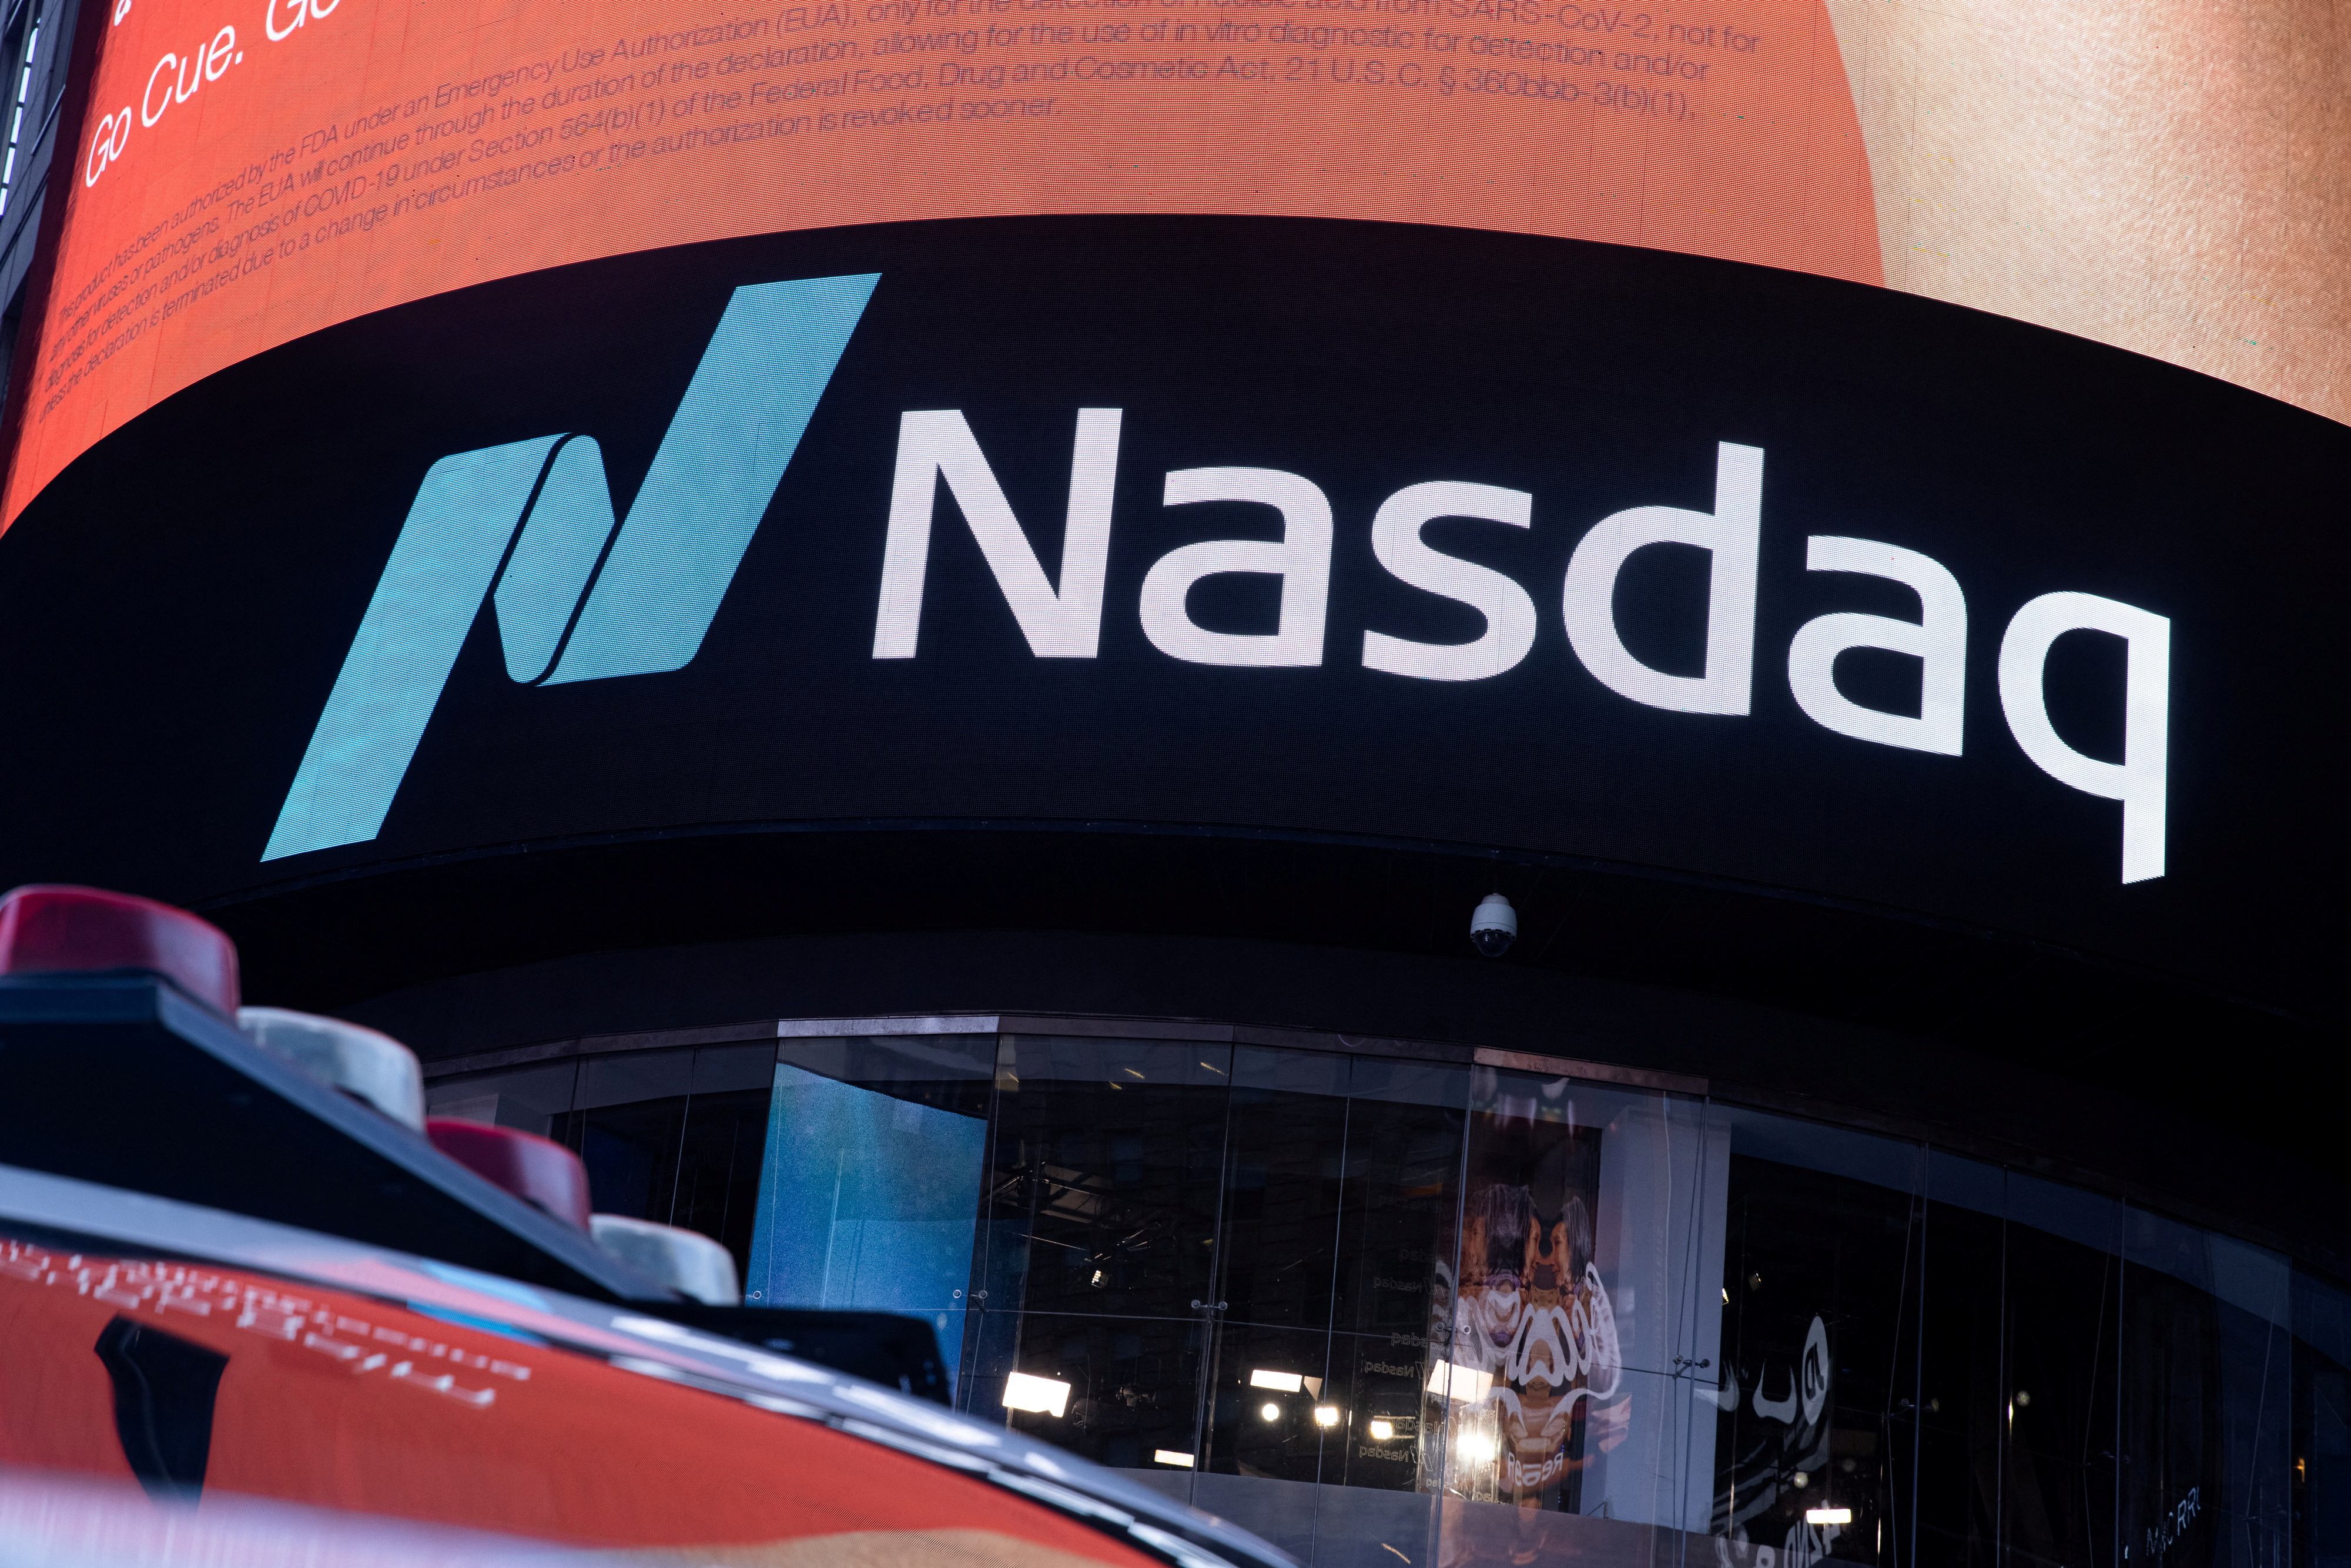 Nasdaq-100 Price Hits All-time High after 4 Straight Months of Gains